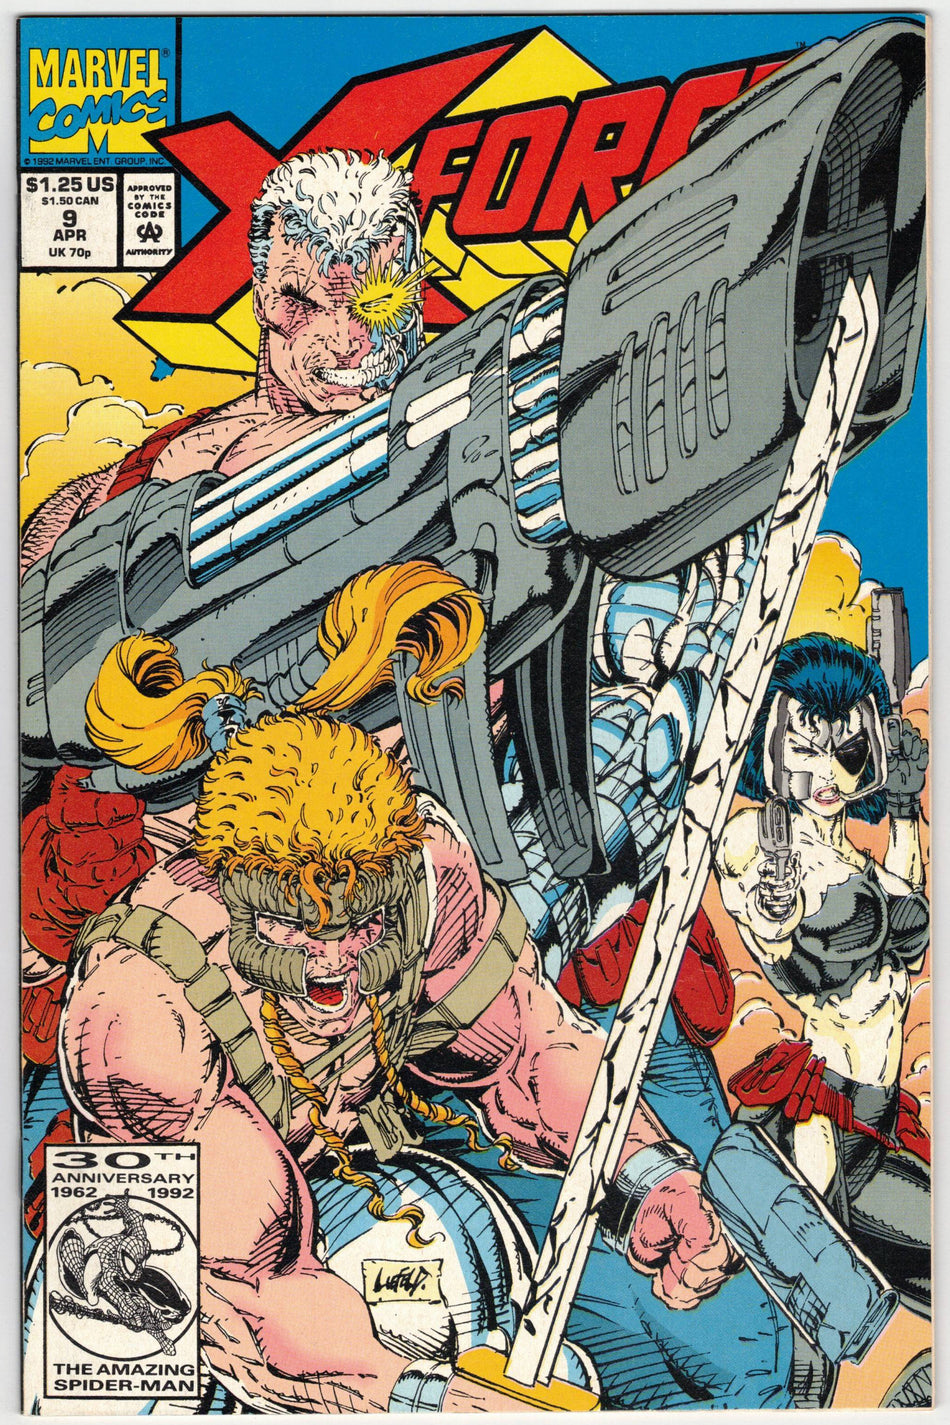 Photo of X-Force, Vol. 1 (1992) Issue 9 - Near Mint Comic sold by Stronghold Collectibles